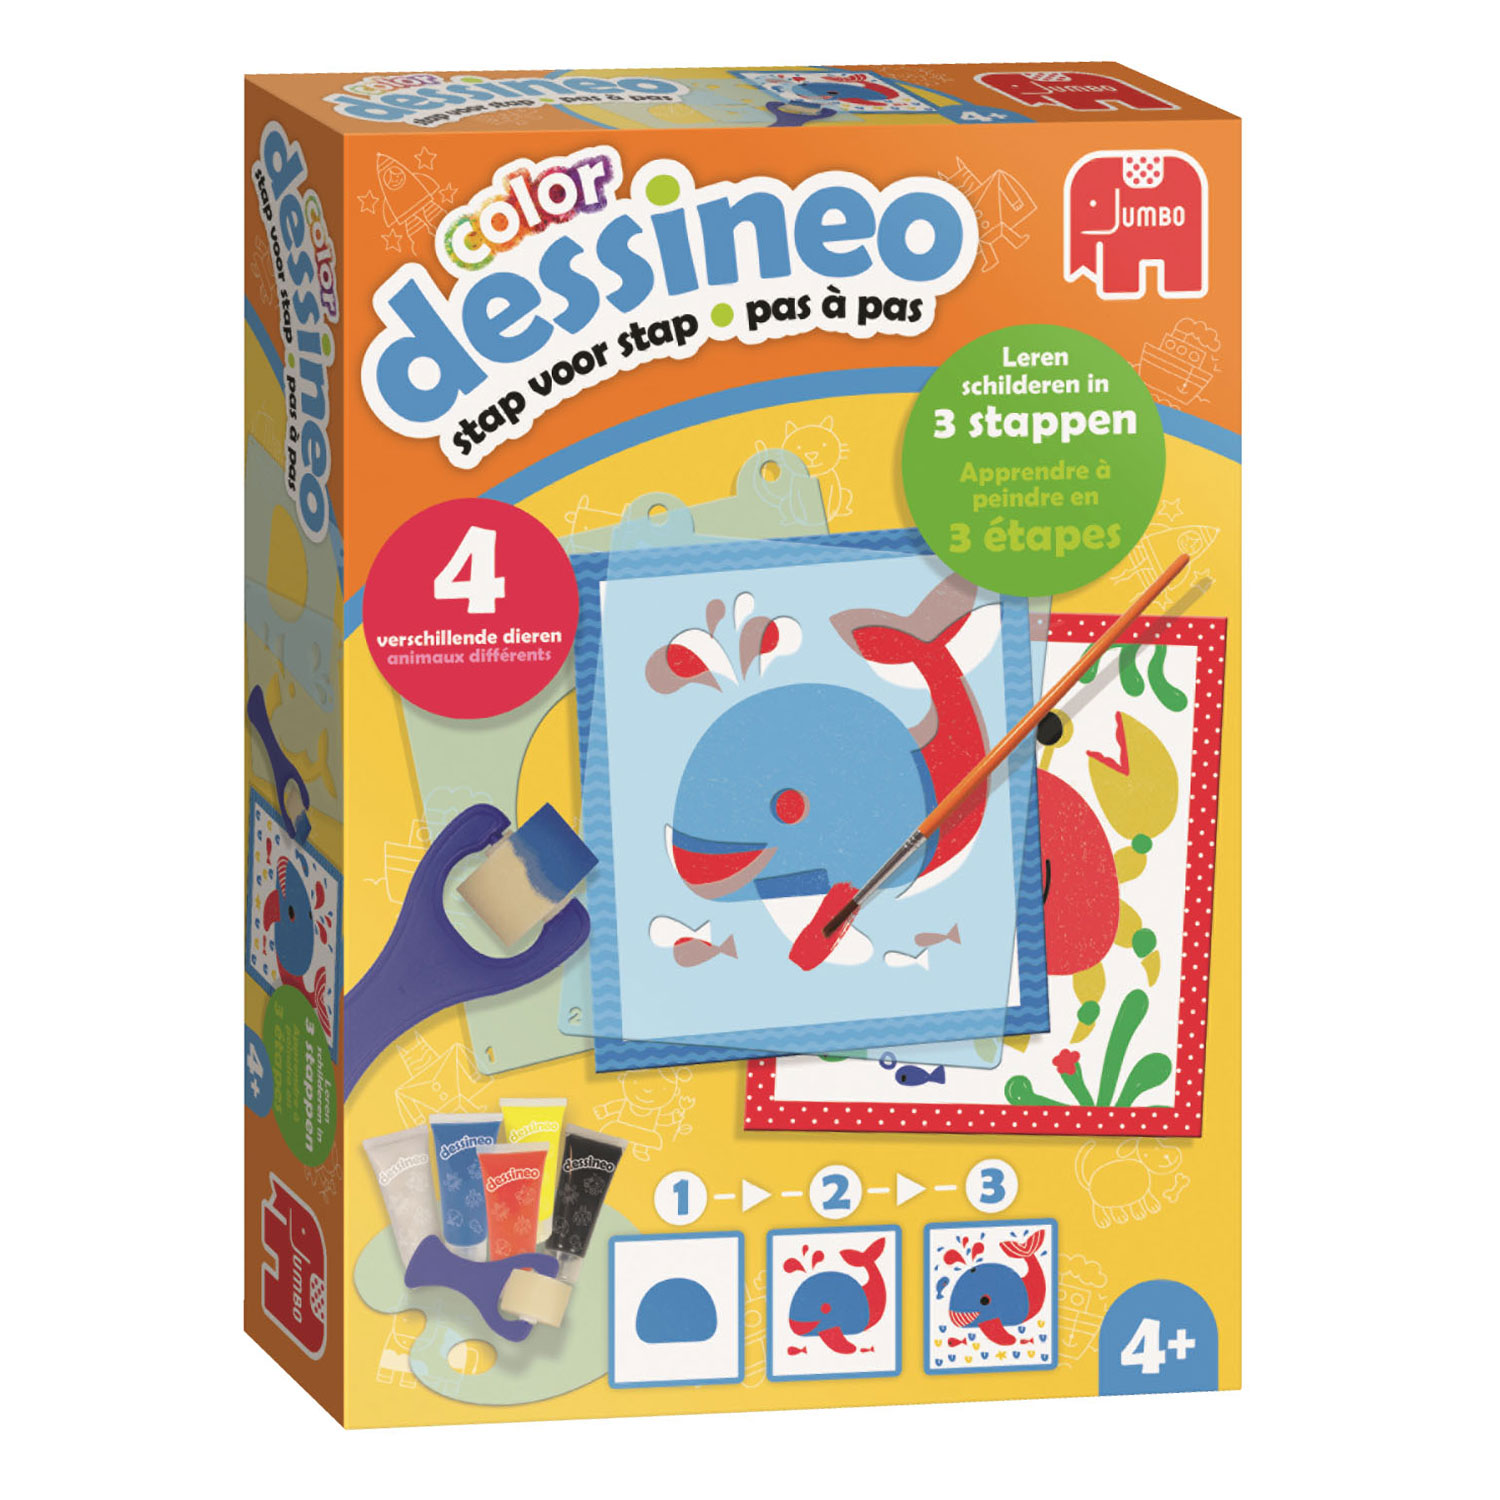 Dessineo Color Painting with Templates - Animals